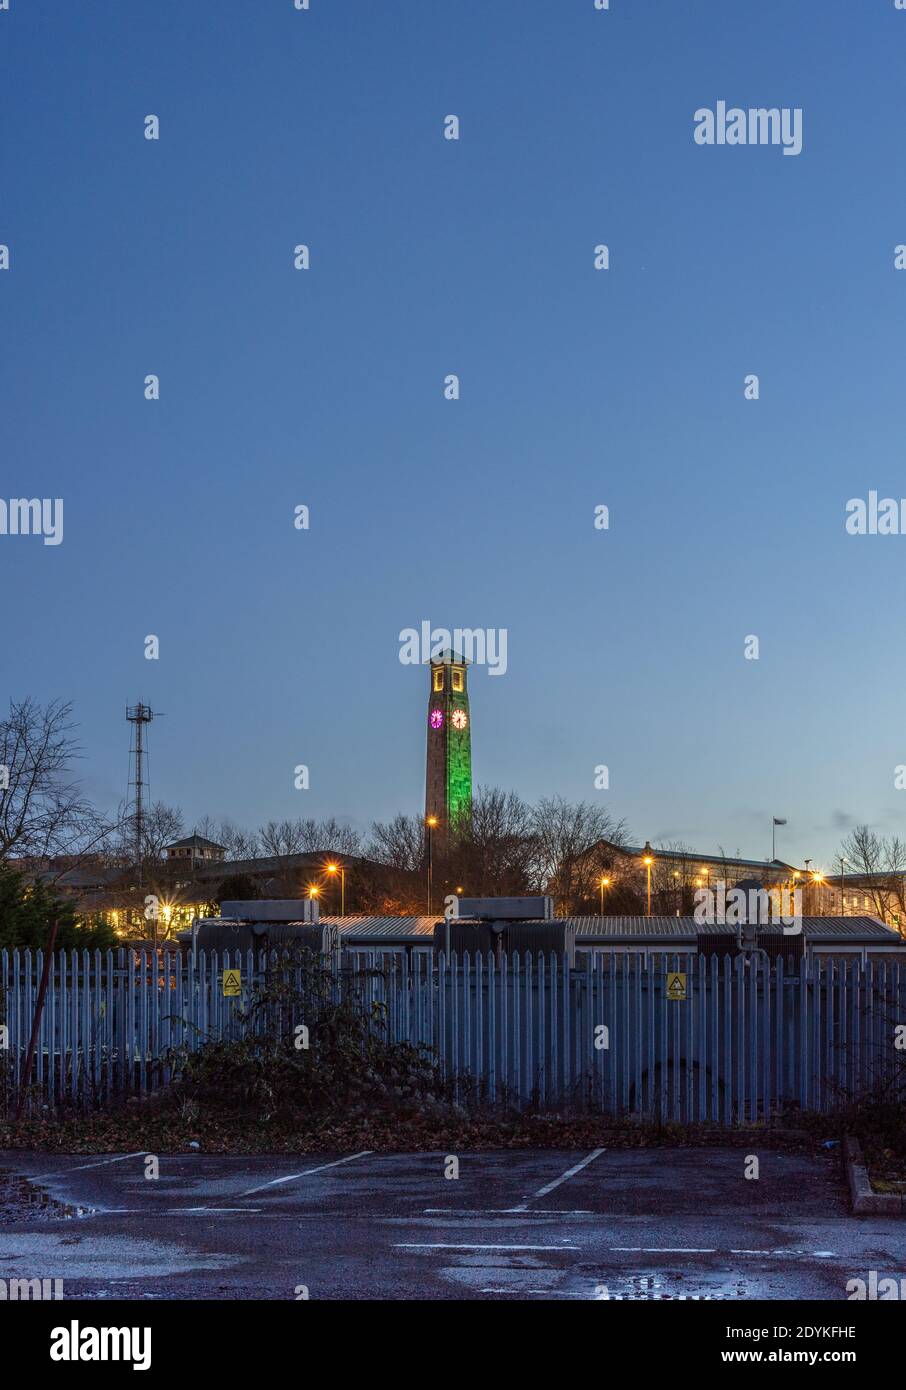 Civic Centre clock tower in festive lights during blue hour in December 2020 in the city centre of Southampton, Hampshire, England, UK Stock Photo